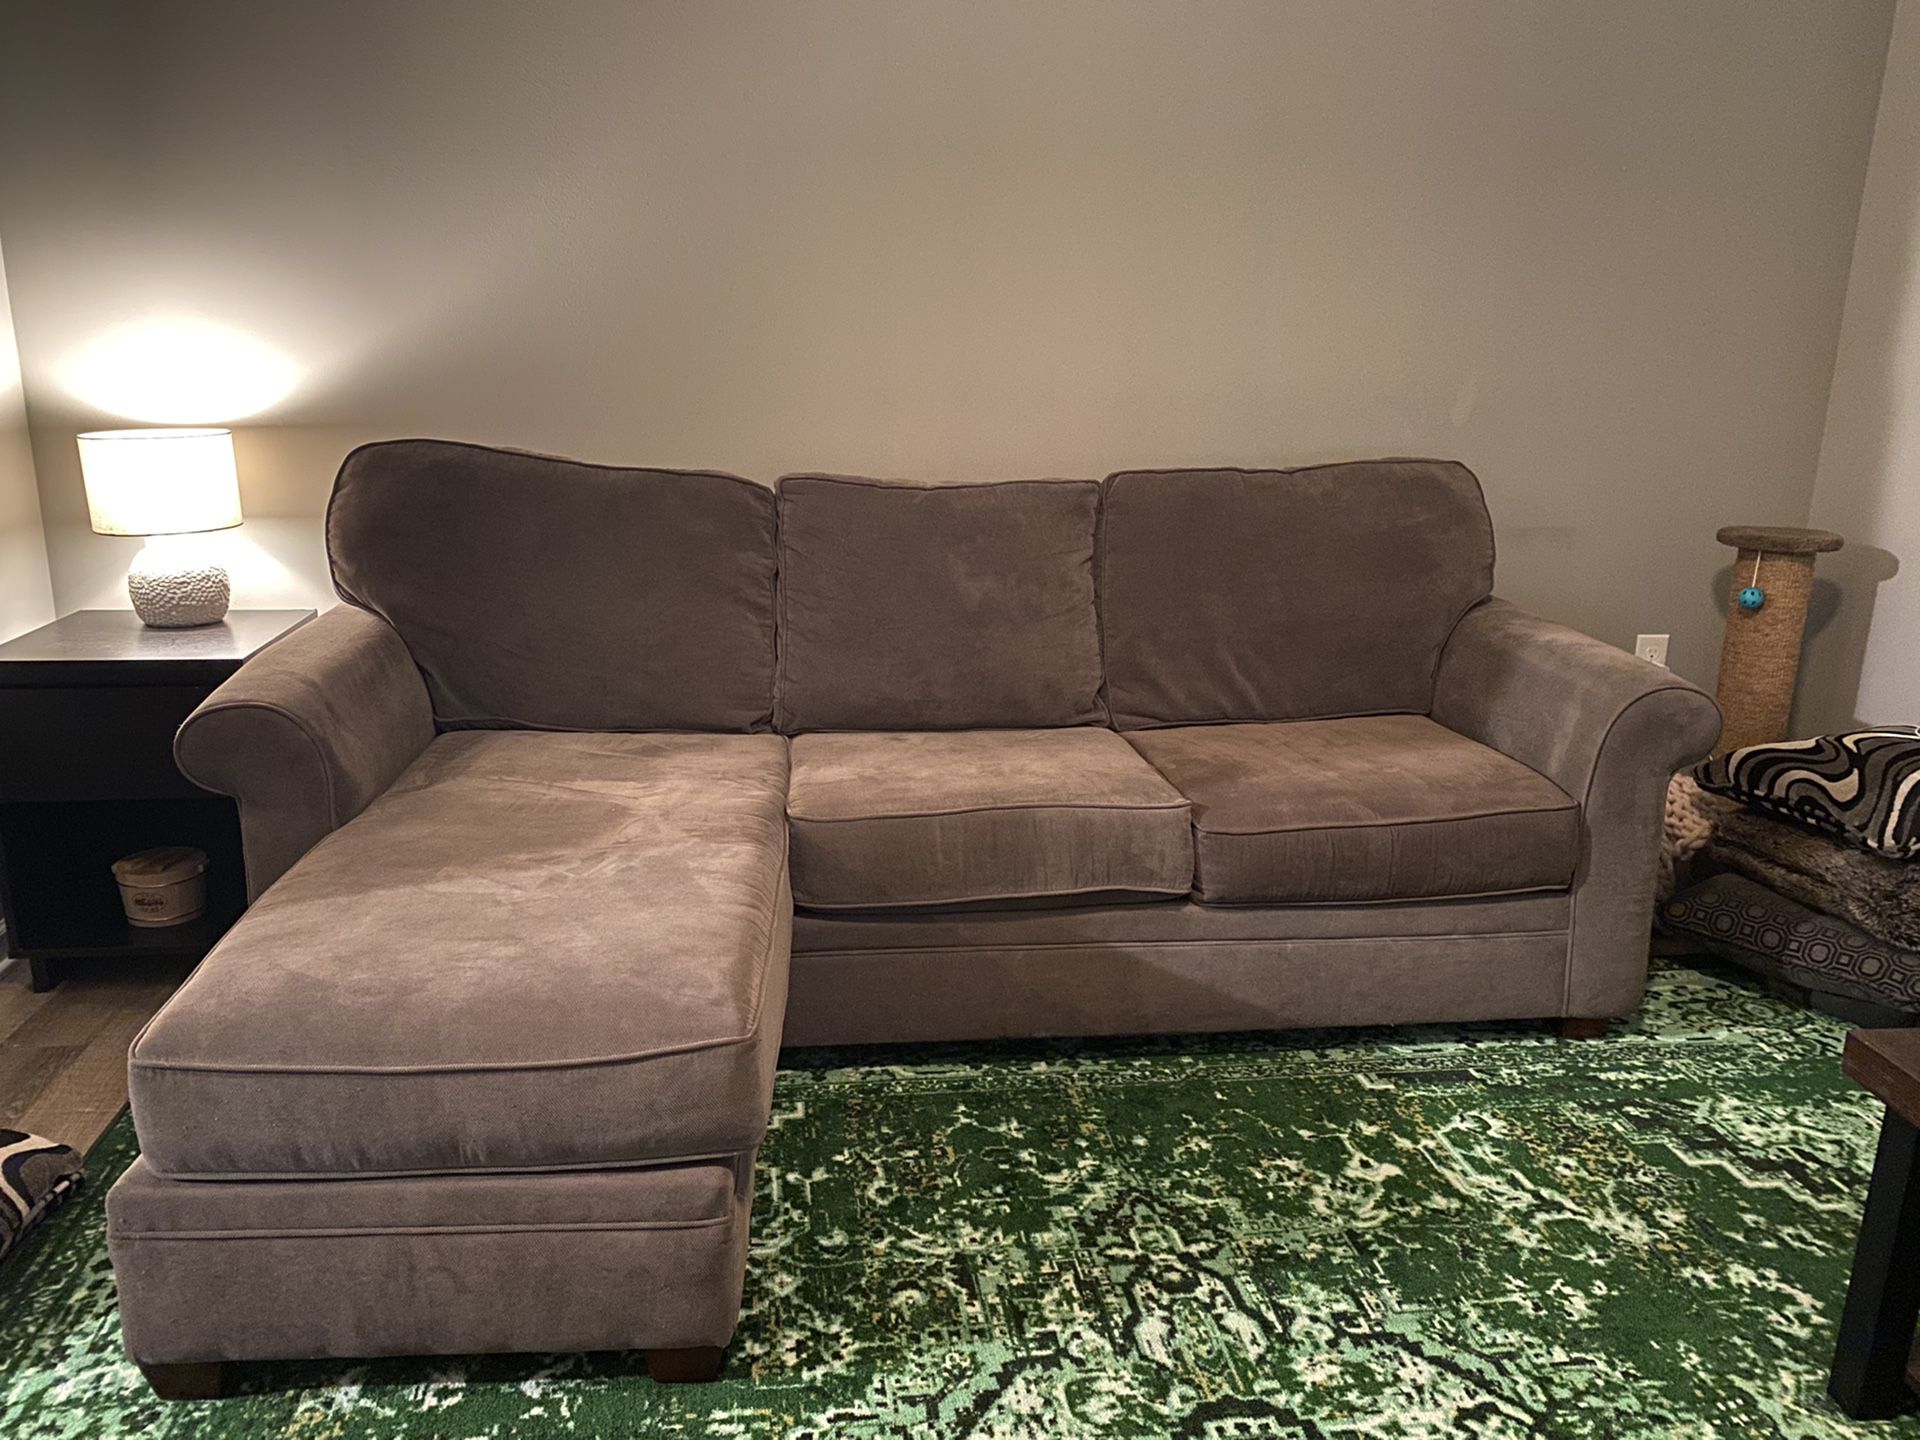 Good Condition Sectional Brown Couch